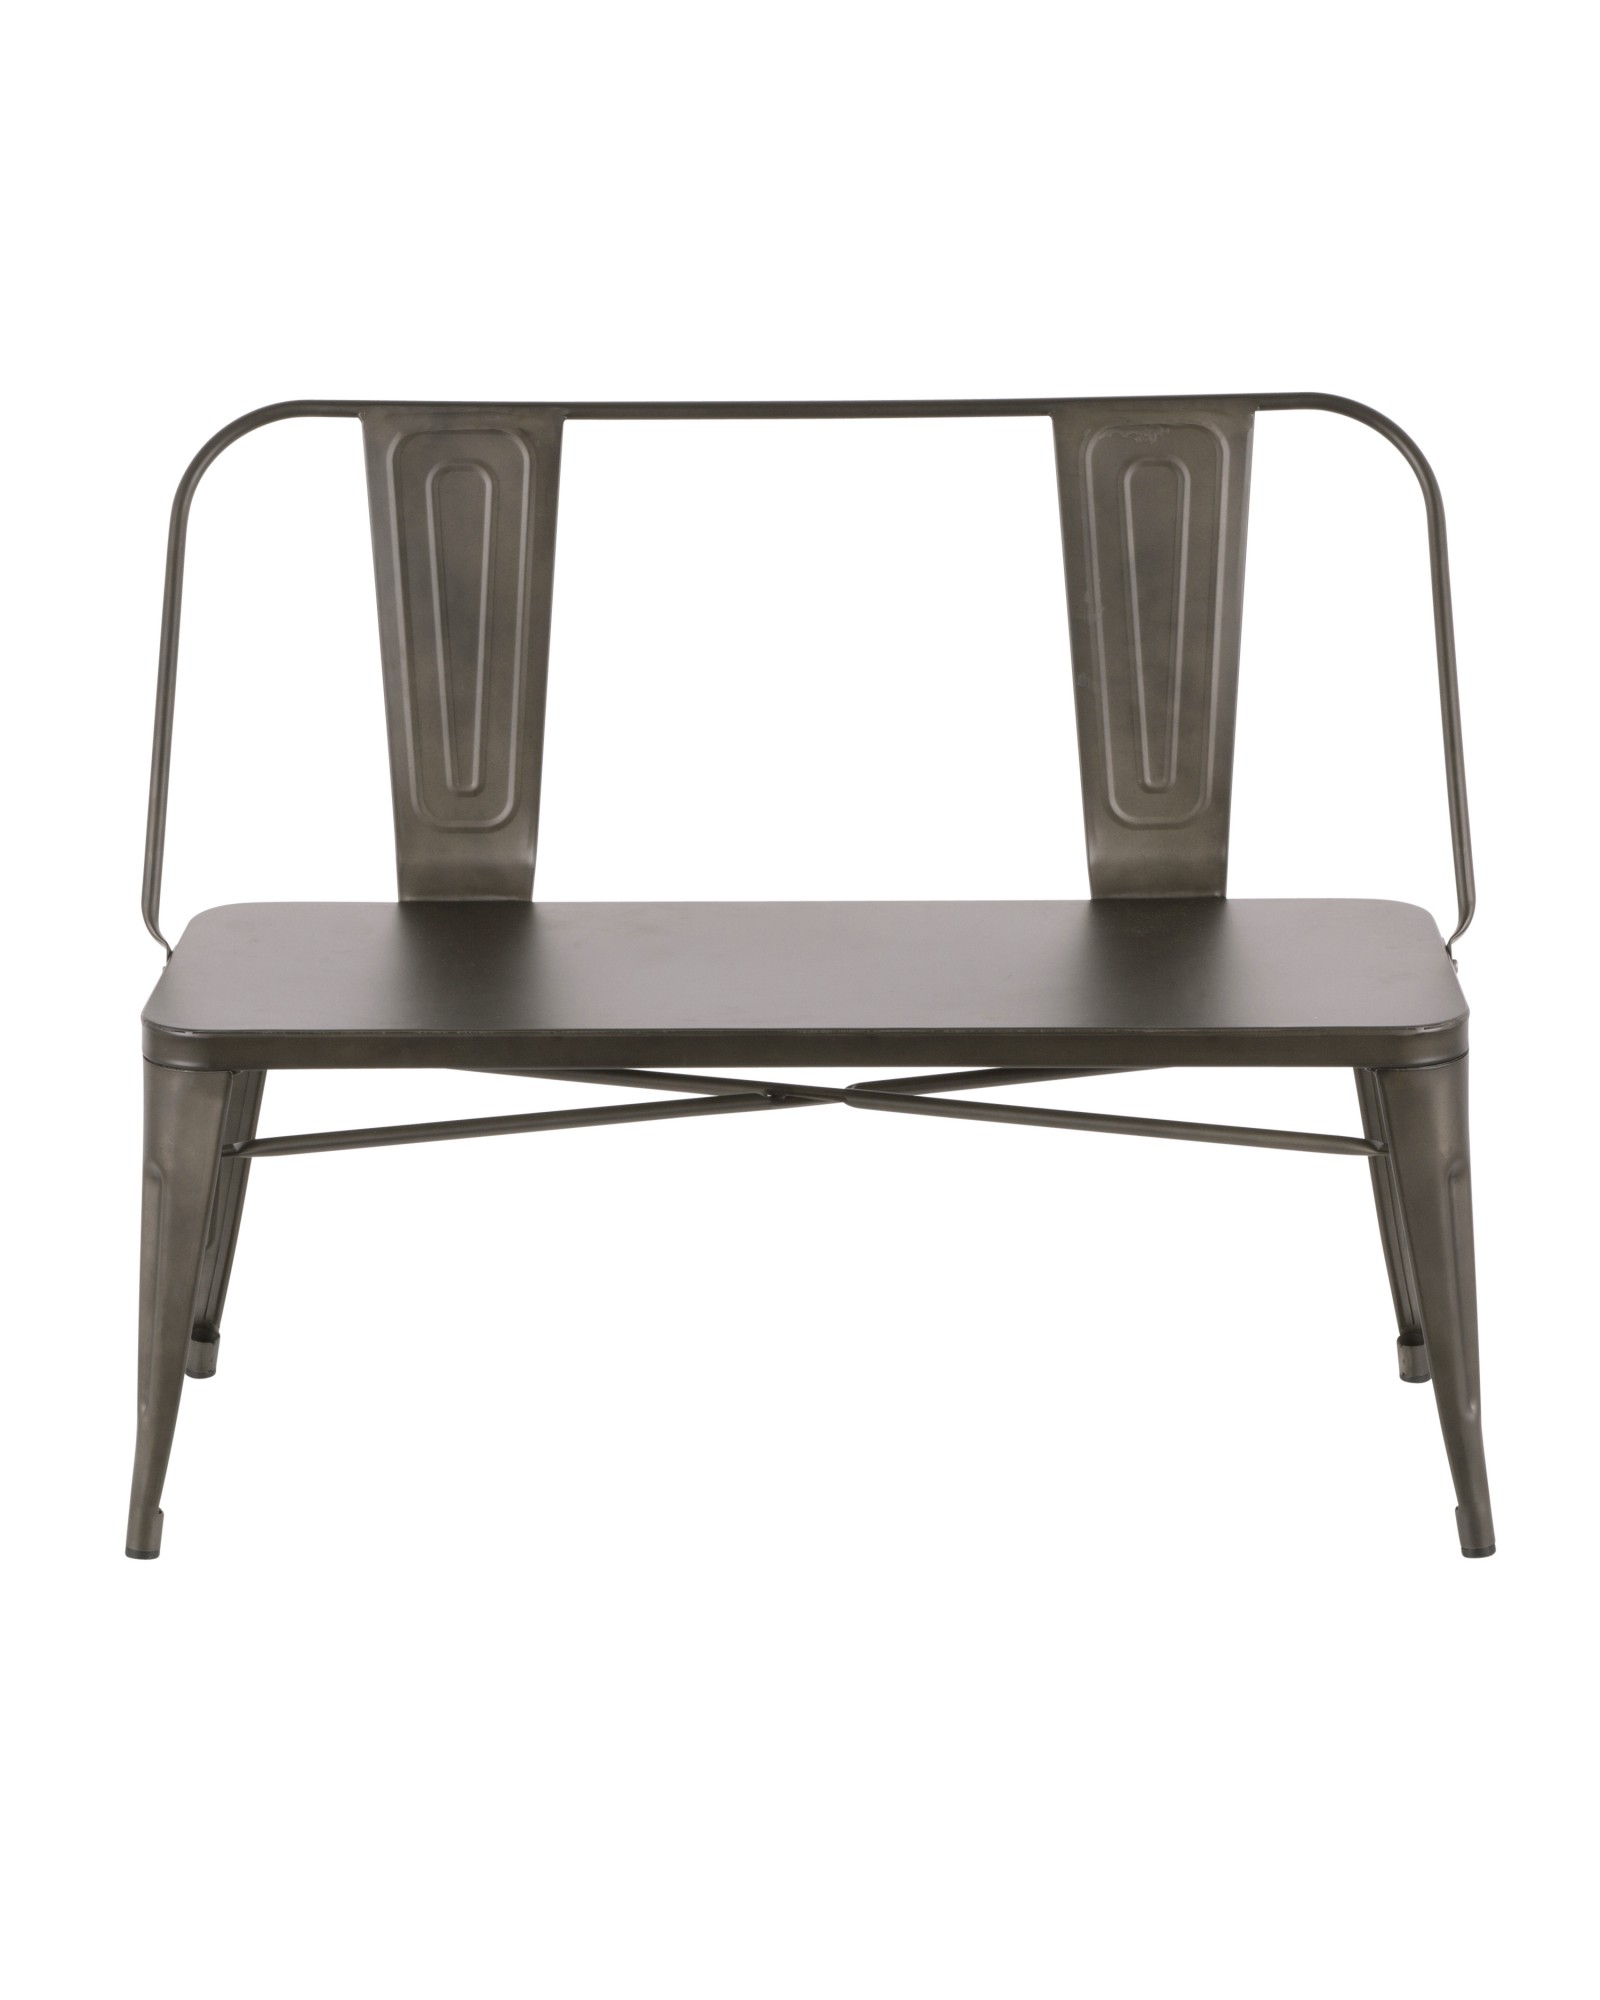 Oregon Industrial Metal Dining/Entryway Bench with Antique Finish